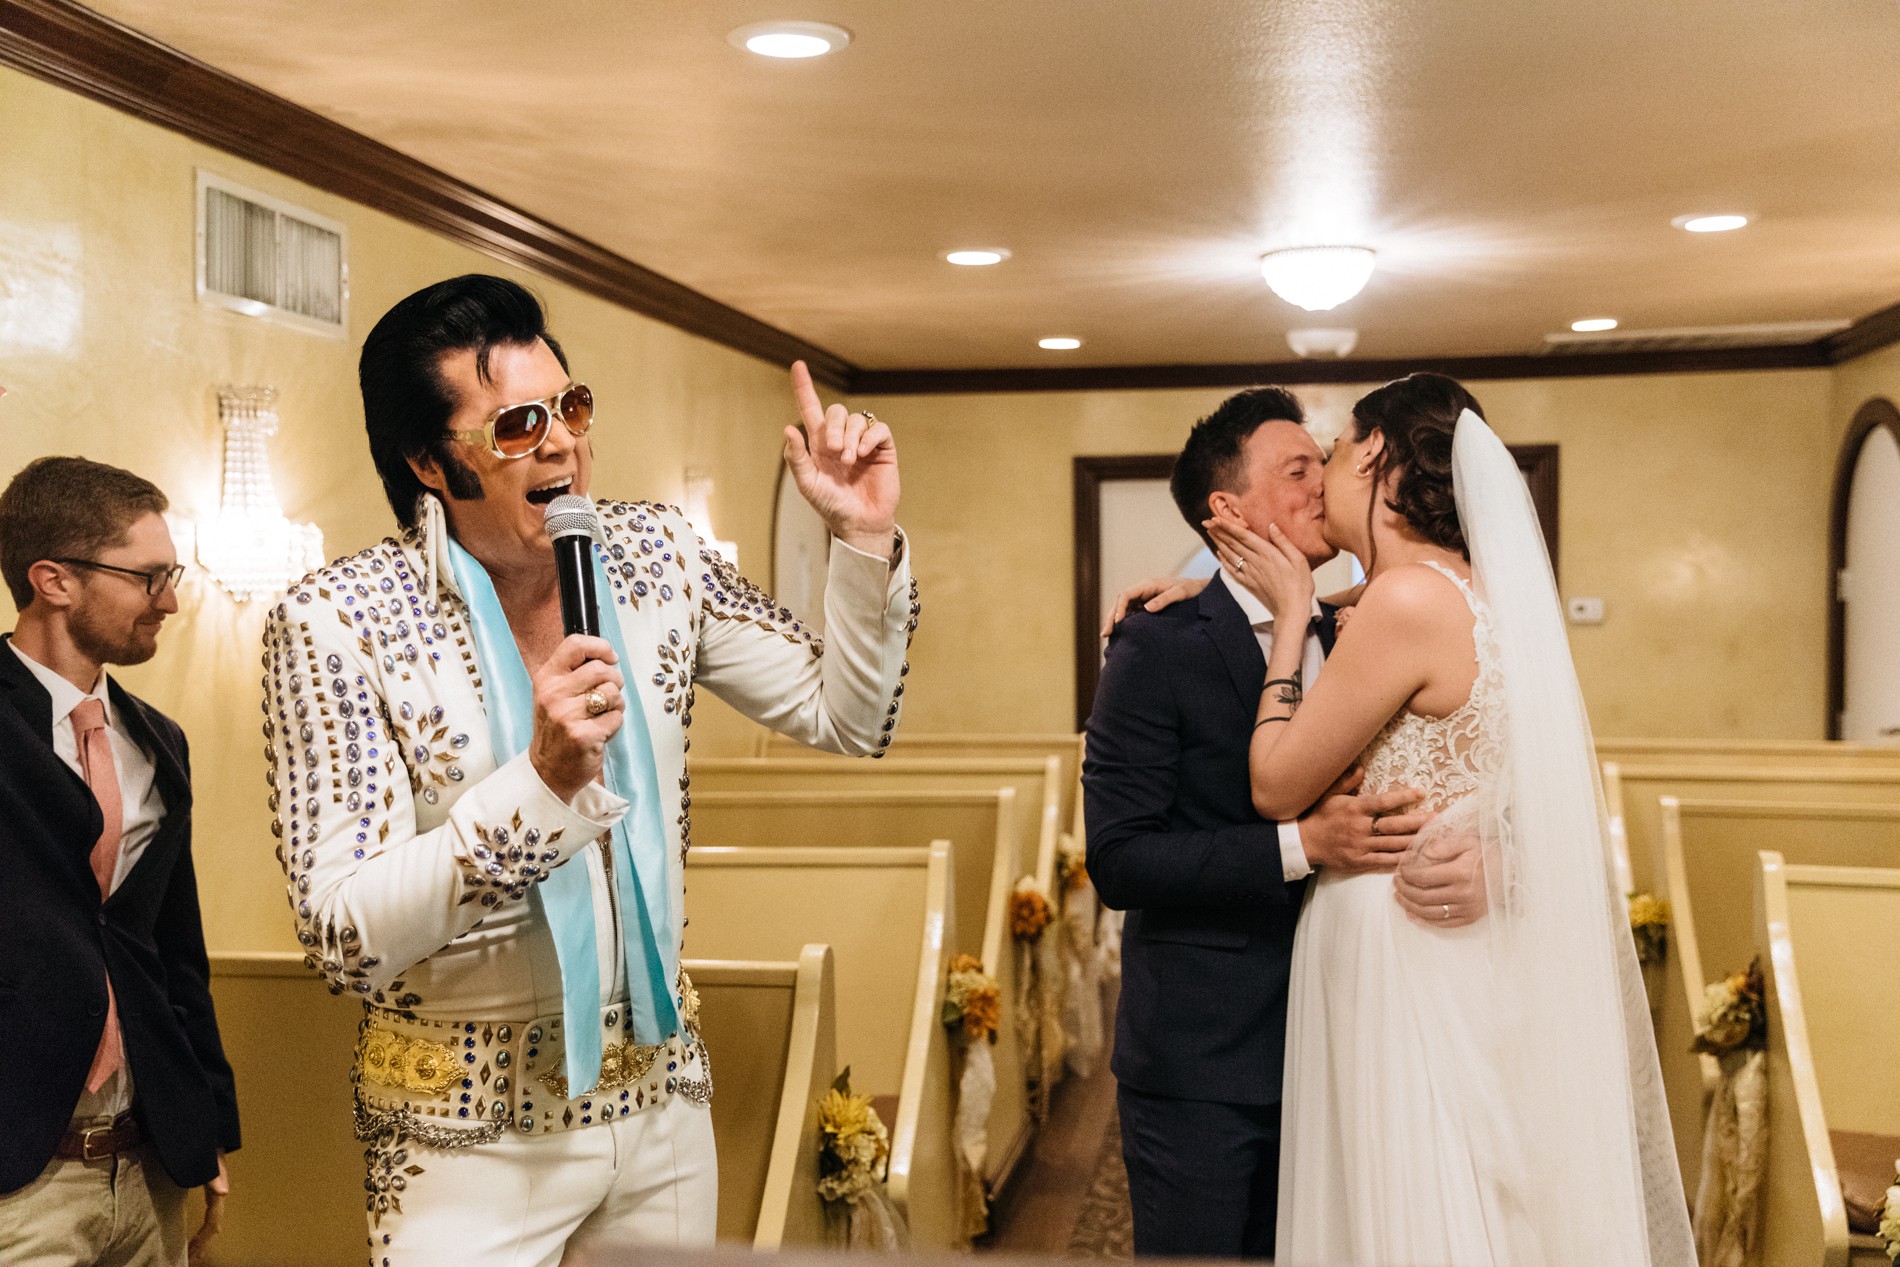 Graceland Wedding Chapel: The First Chapel With an Elvis Impersonator